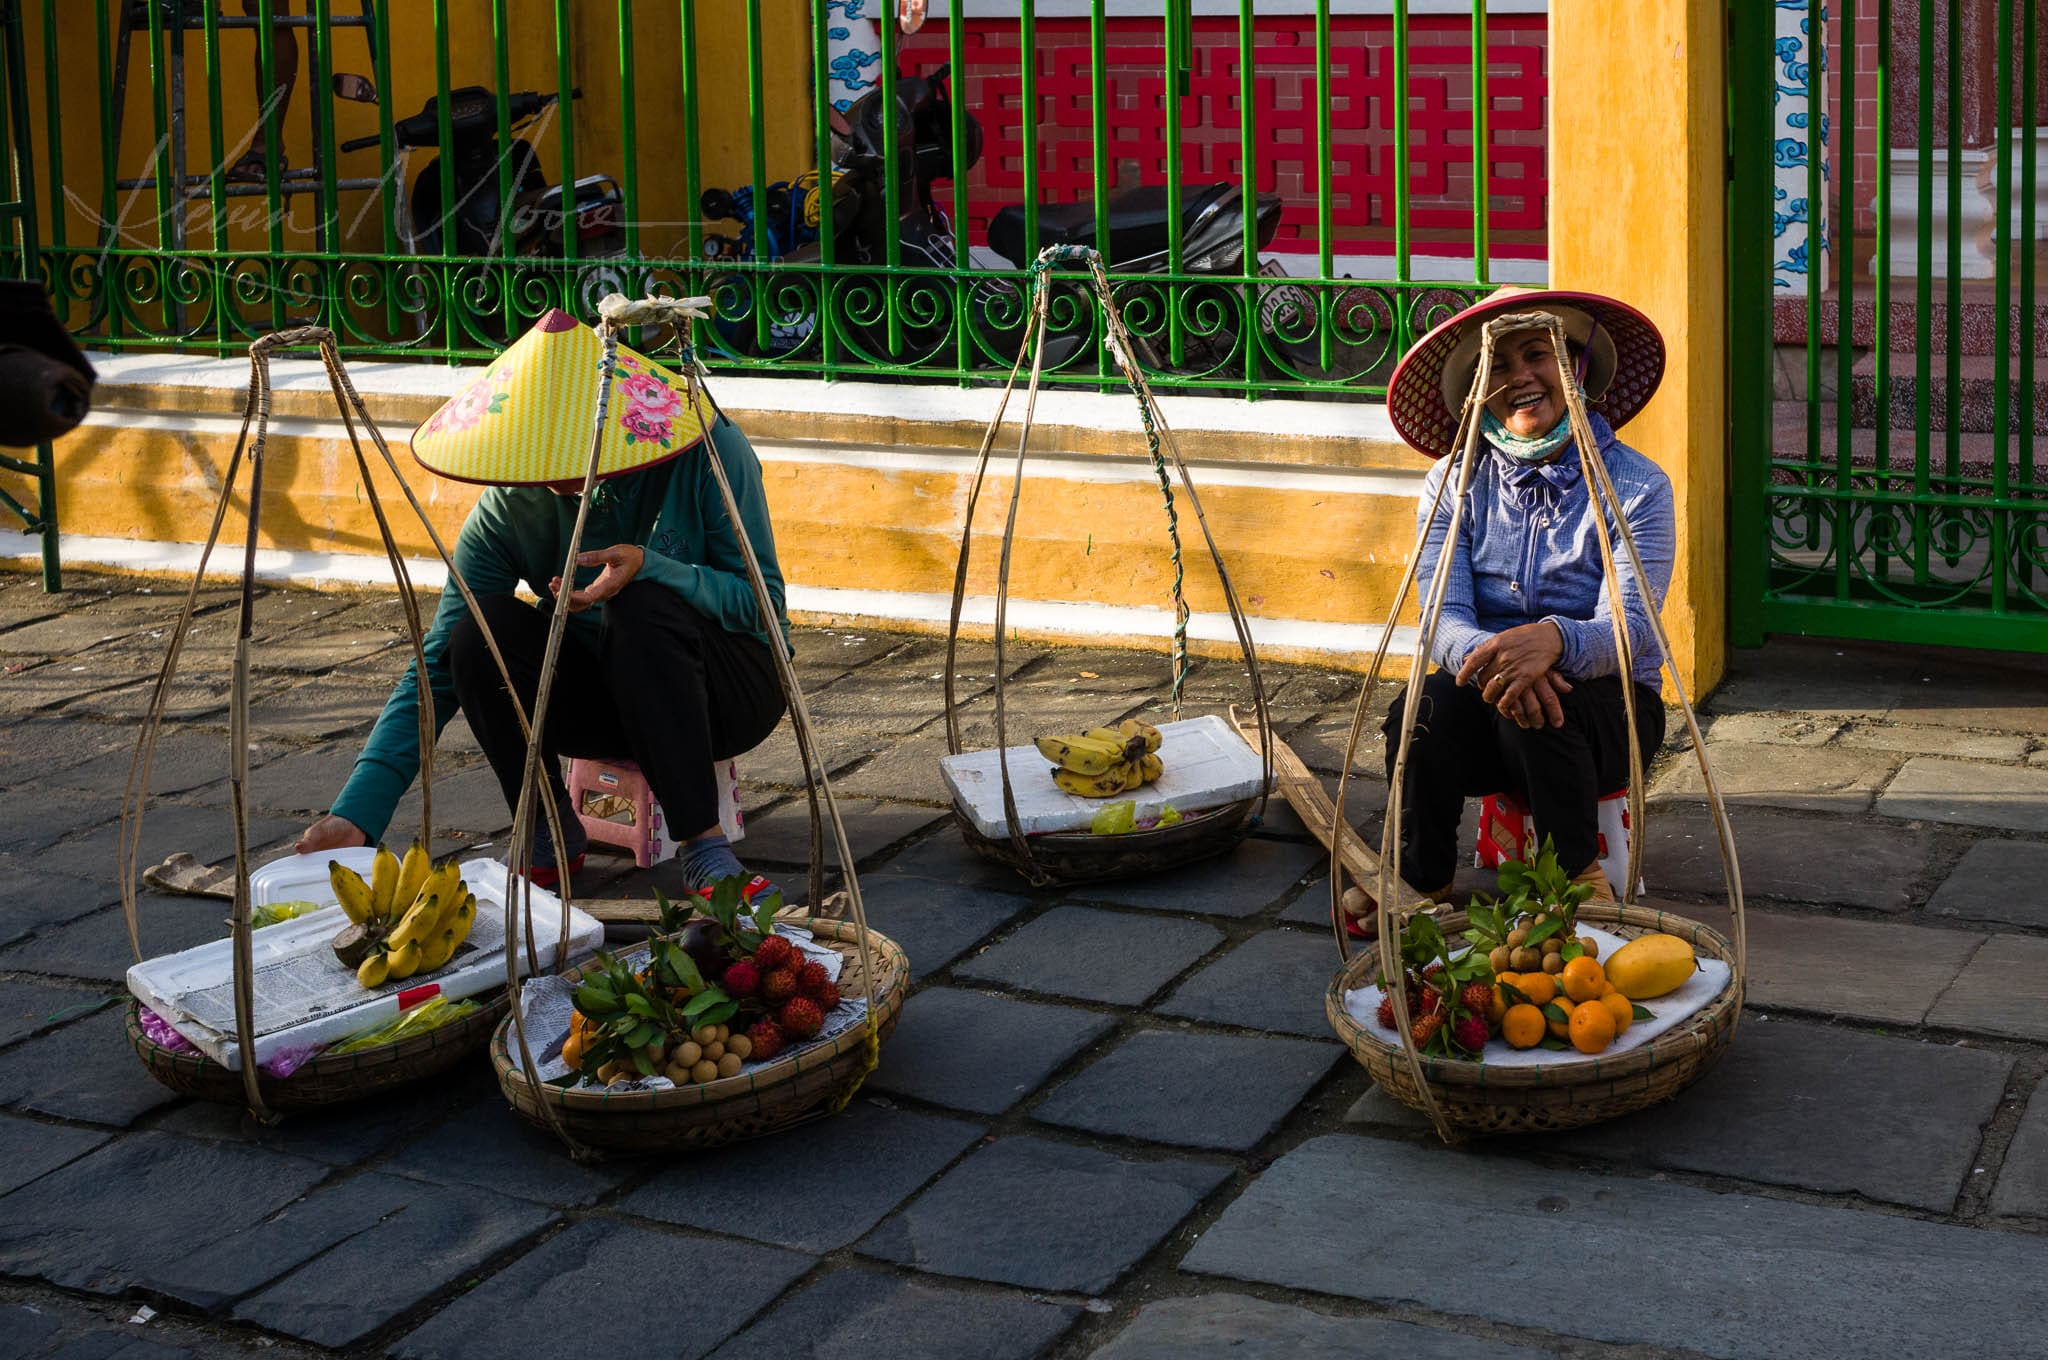 Vietnamese street vendors selling fresh produce from traditional bamboo baskets.